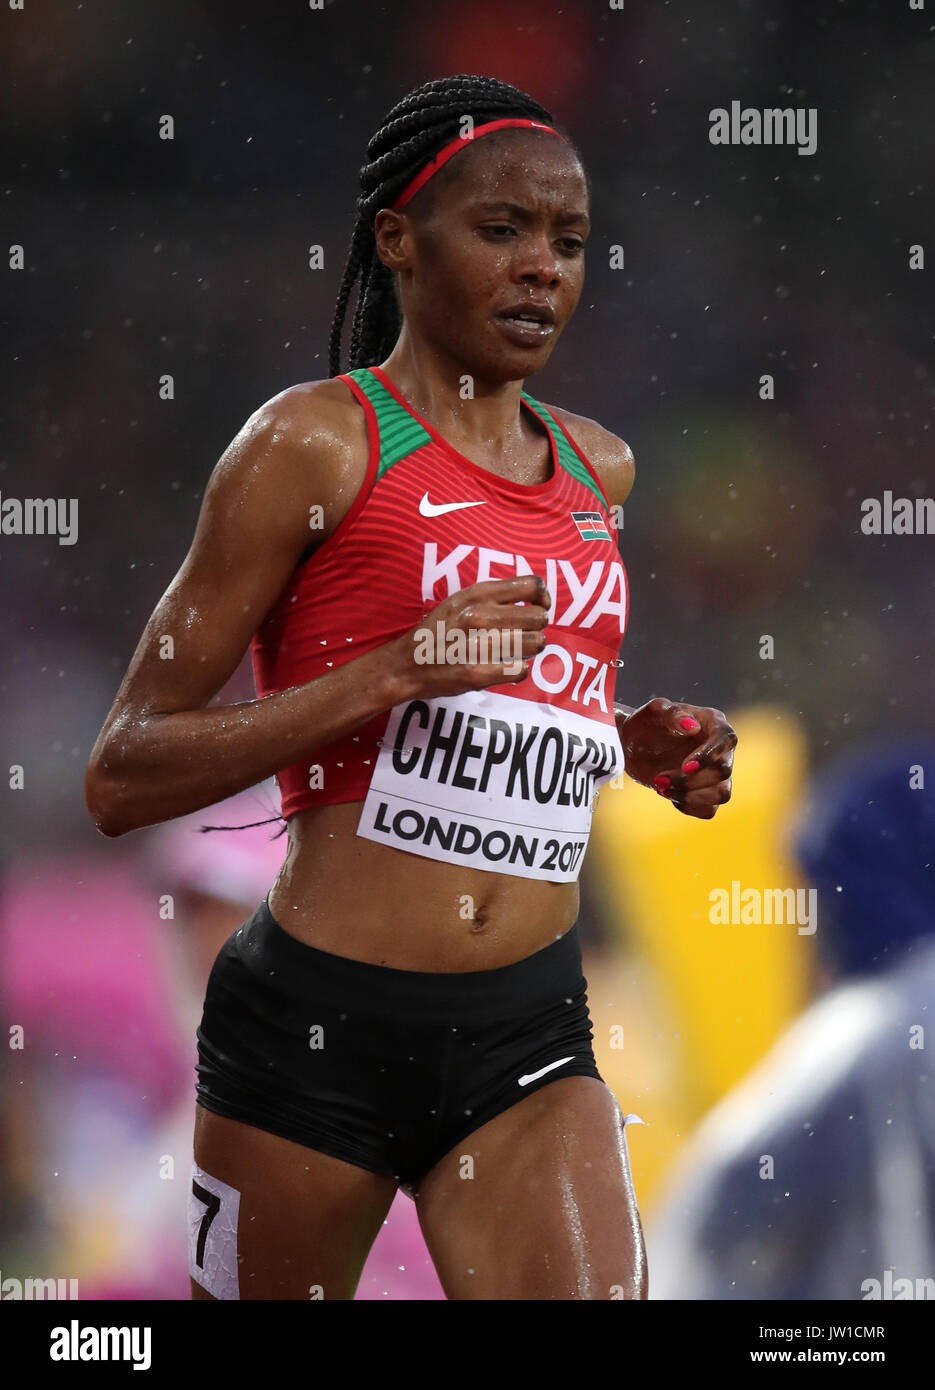 Kenya's Beatrice Chepkoech in the Women's 3000m Steeplechase heat two  during day six of the 2017 IAAF World Championships at the London Stadium.  PRESS ASSOCIATION Photo. Picture date: Wednesday August 9, 2017.